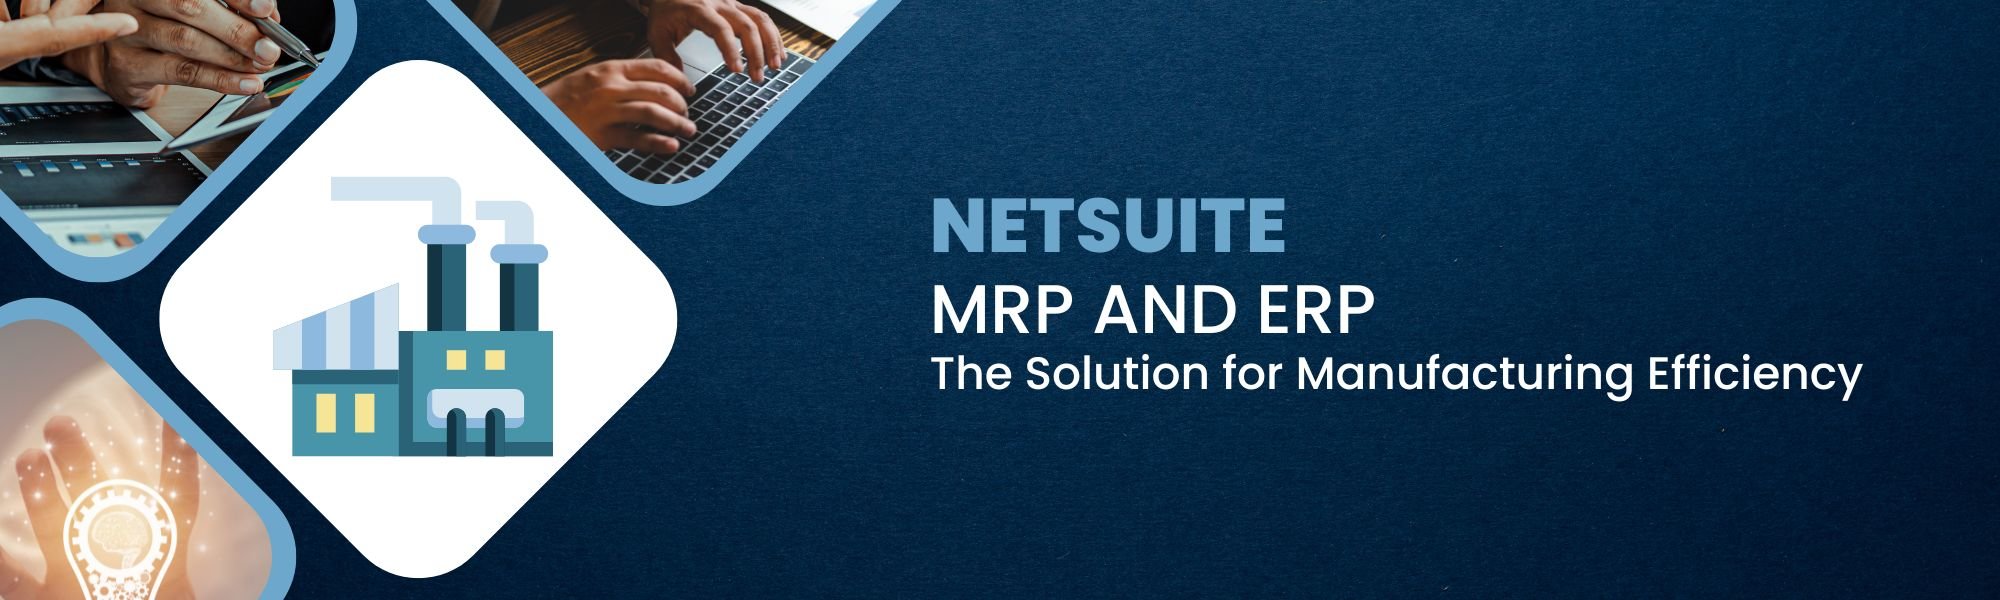 NetSuite's MRP and ERP: The Solution for Manufacturing Efficiency